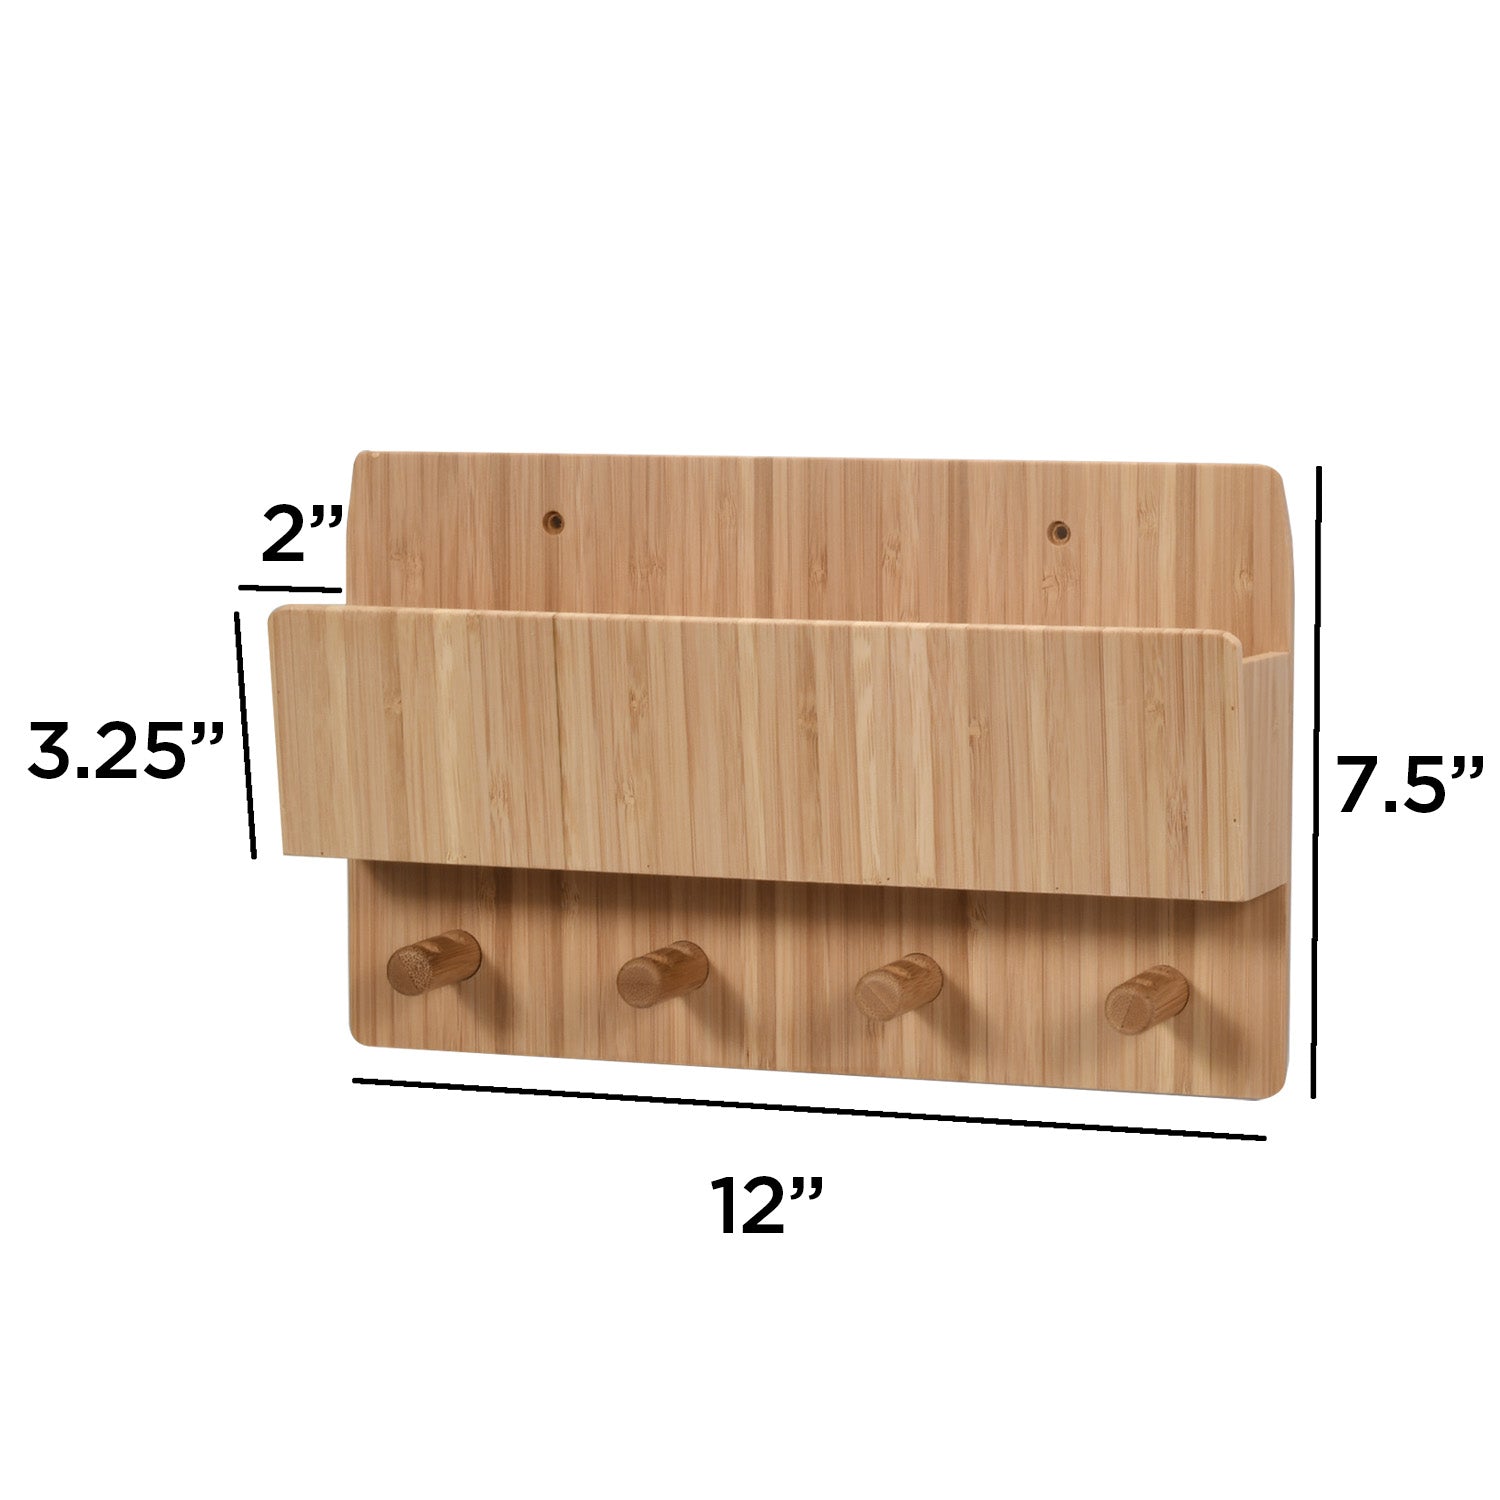 Bamboo Wall Mount Organizer with Hooks